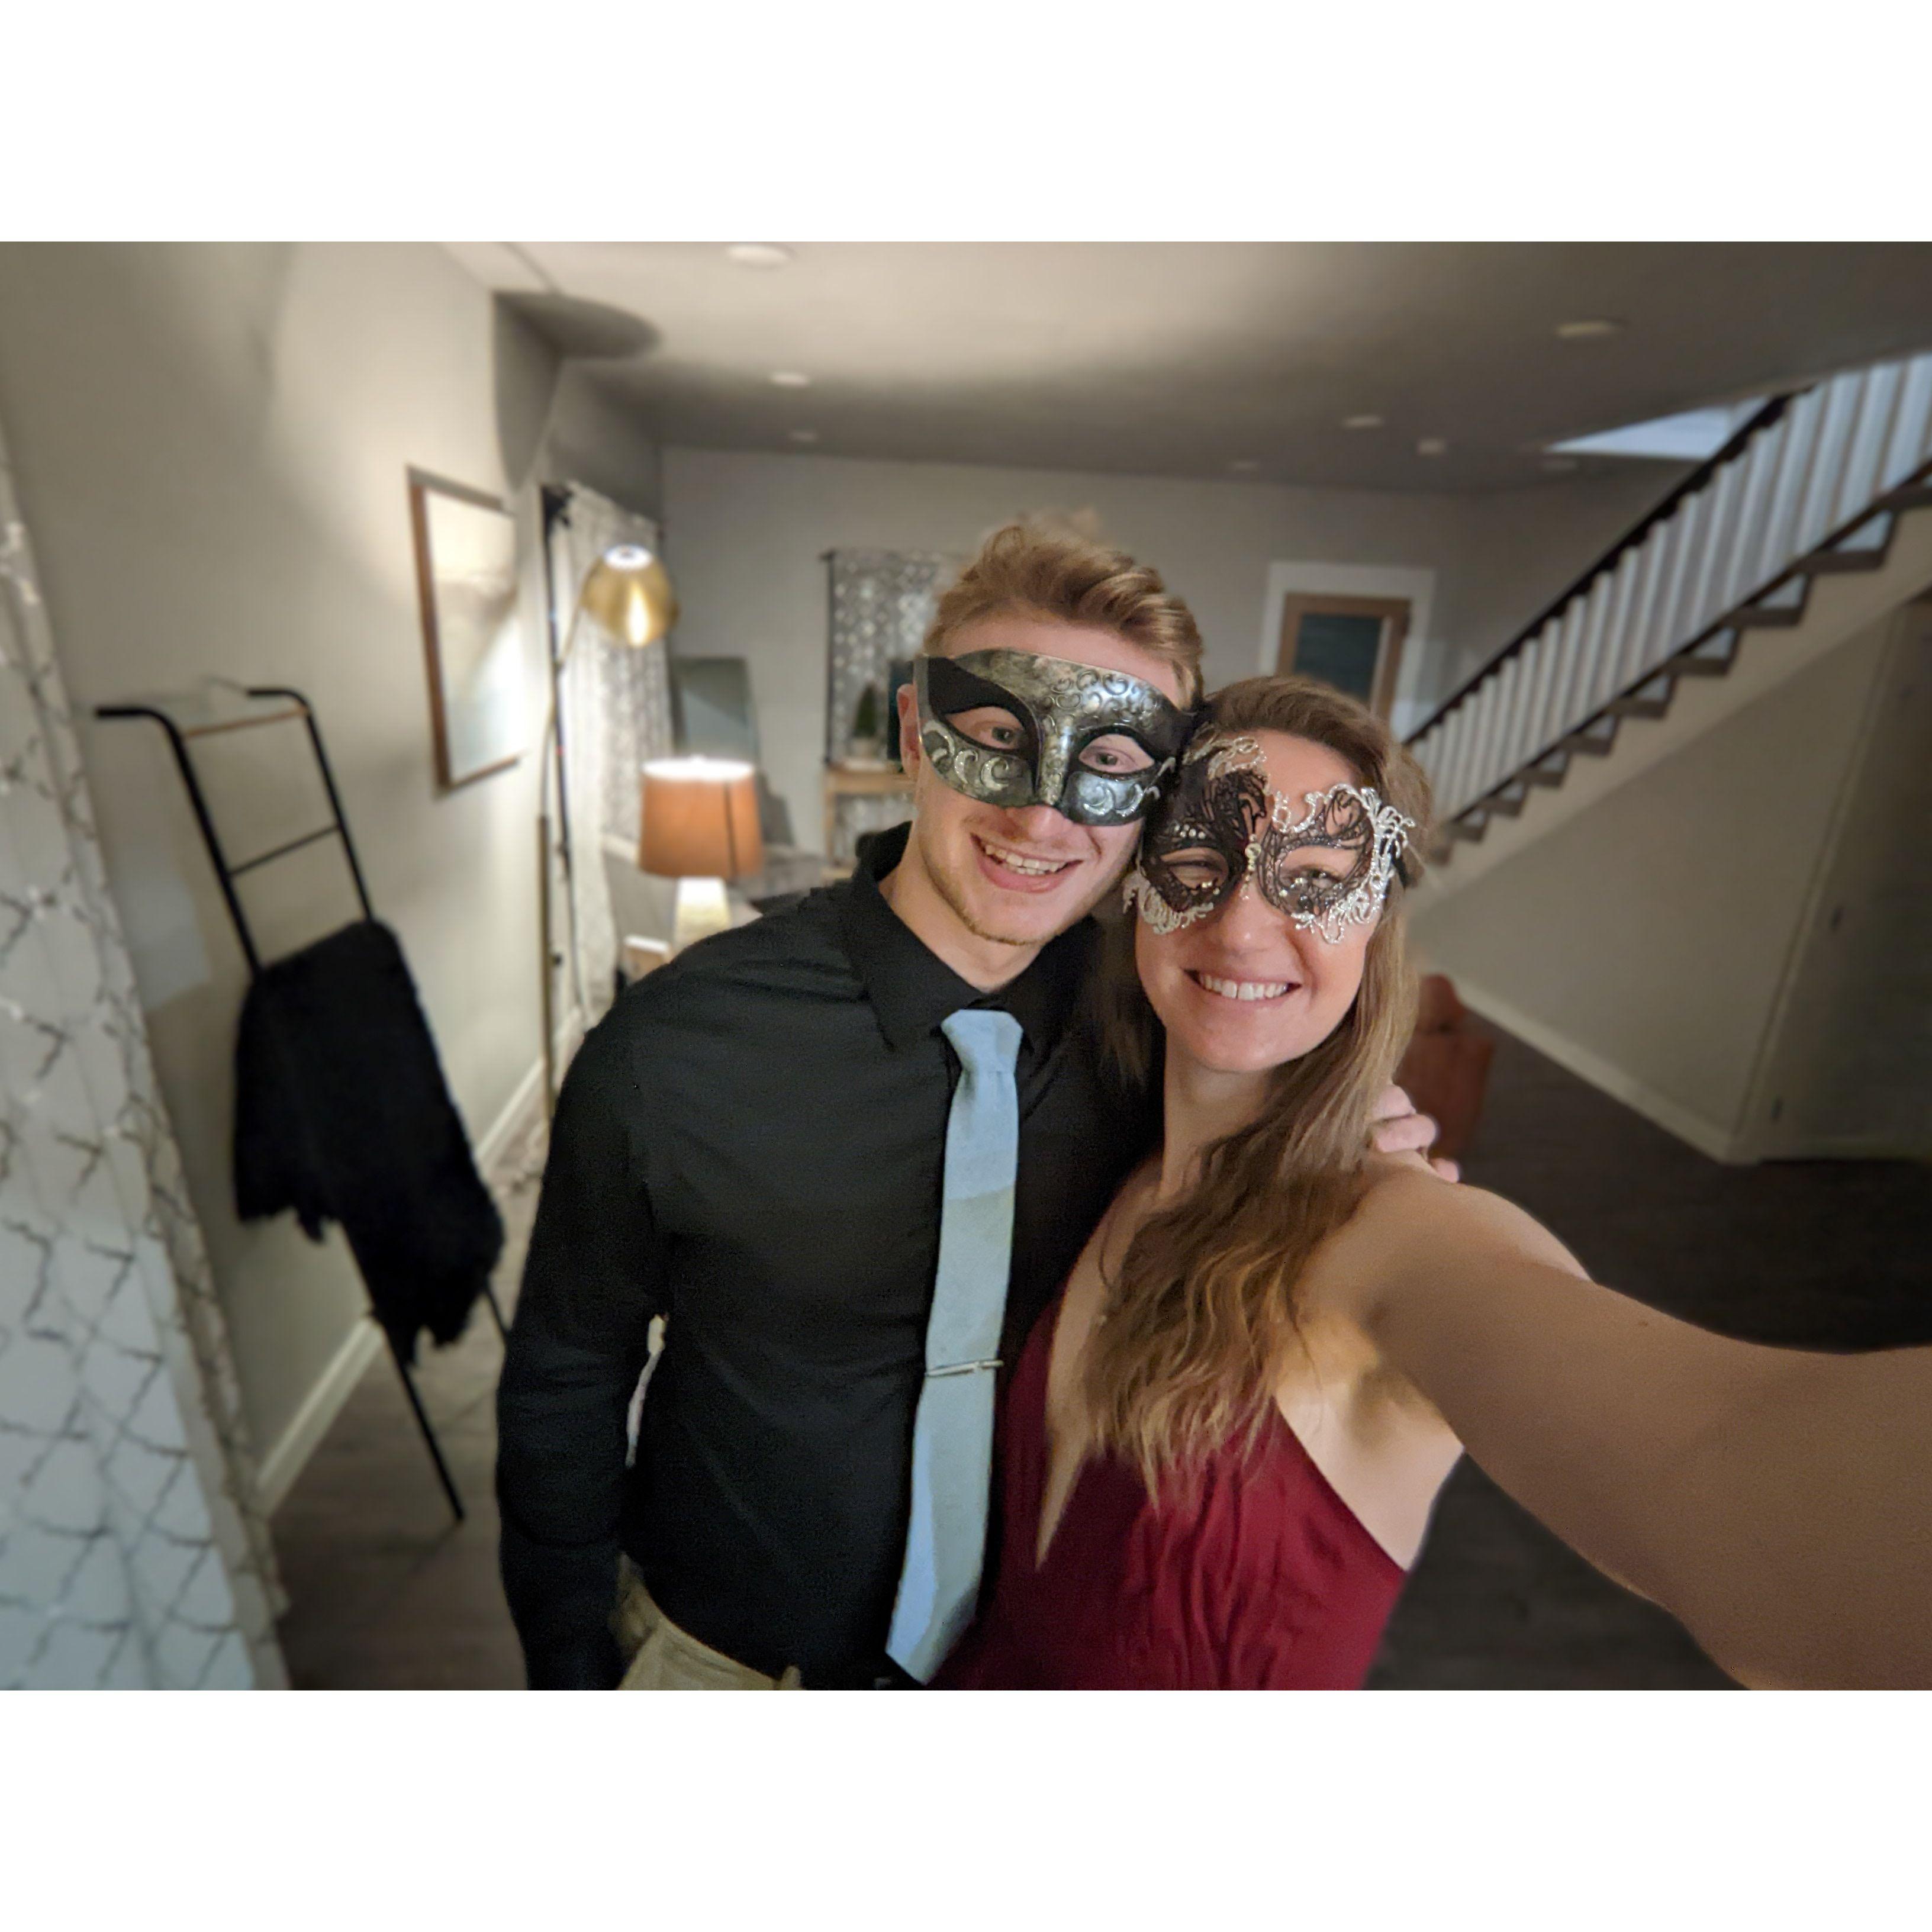 Katie and Noah had only been together a couple of weeks when Noah asked if he could bring her as a plus one to a masquerade party a month away. That's how Katie first new Noah was serious about her.